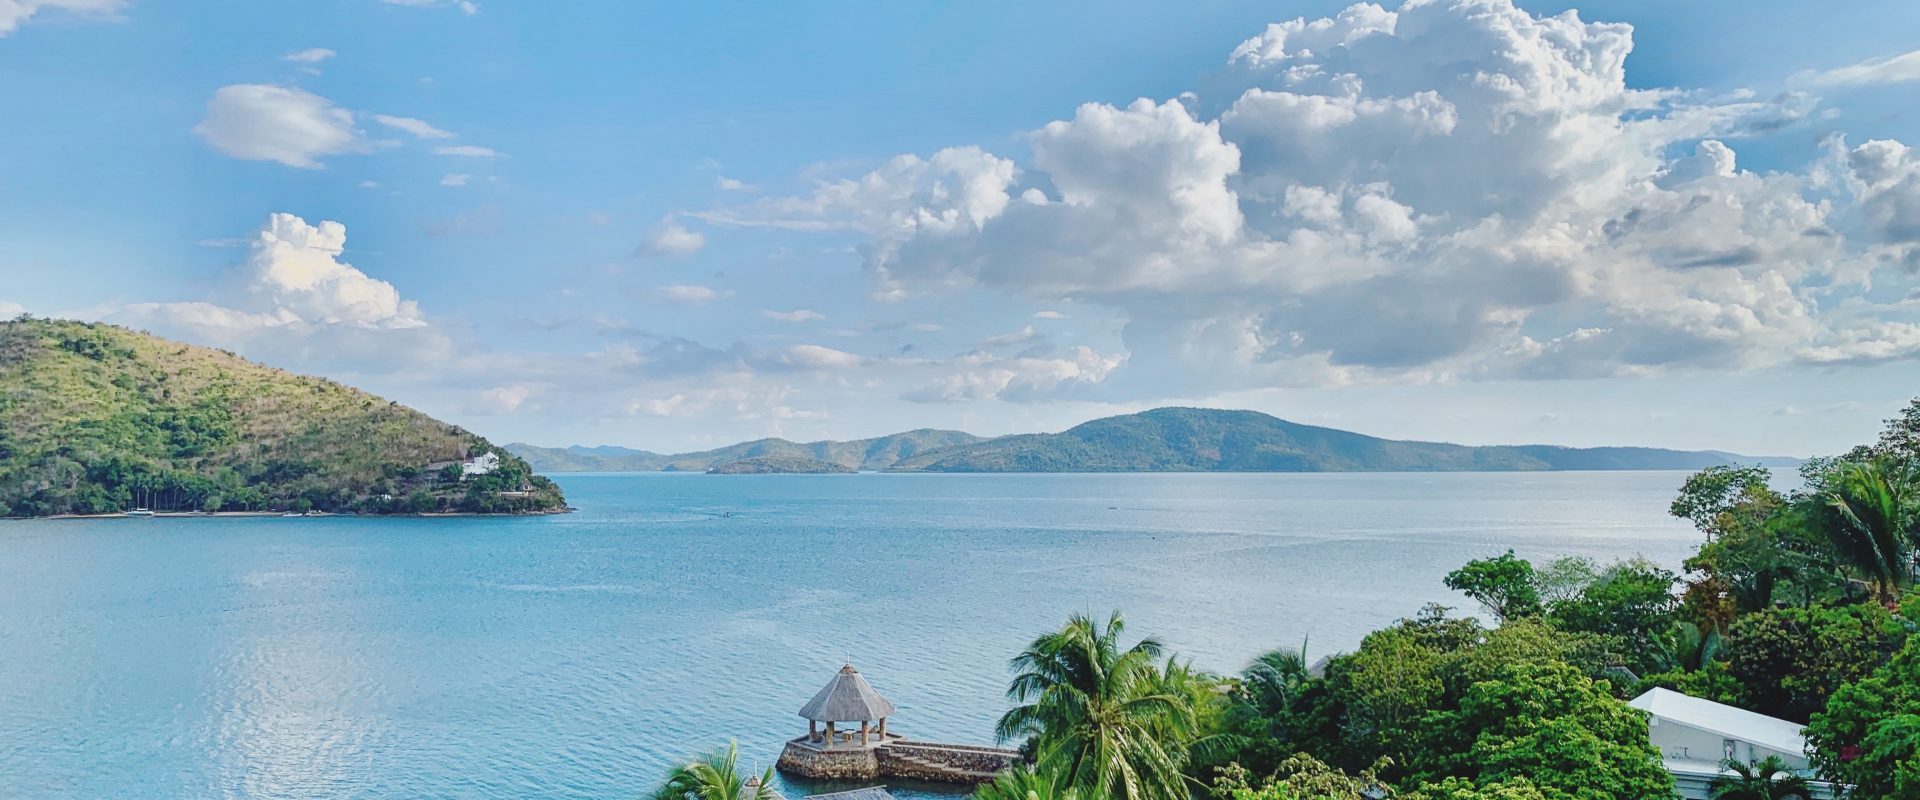 The views are endless at Busuanga Bay Lodge in Coron, Philippines.